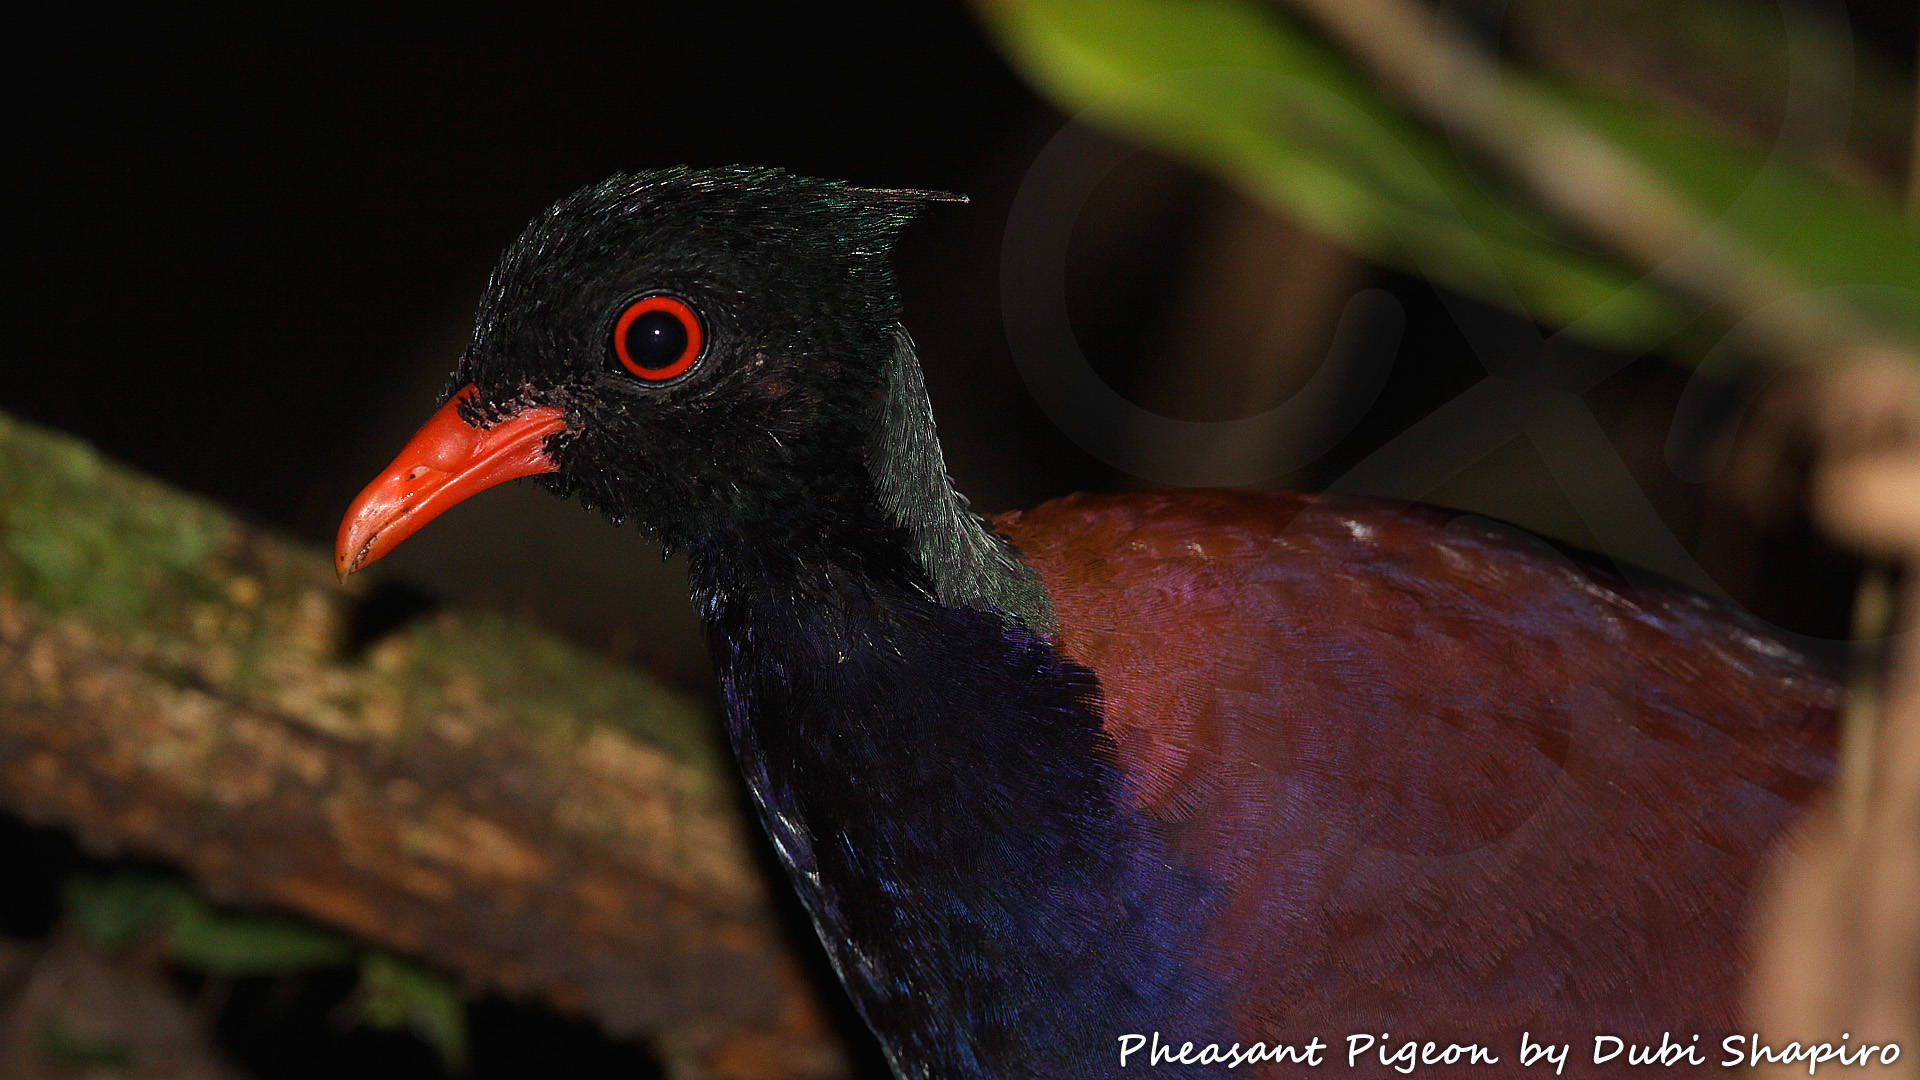 New Guinea forest bird communities differ markedly from elsewhere in featuring an unusually high proportion of ground-dwellers like this strange Pheasant Pigeon Otidiphaps nobilis which belongs in its own genus and is among 289 bird species that are endemic to the New Guinea or Papuan avifaunal region. Copyright © Dubi Shapiro